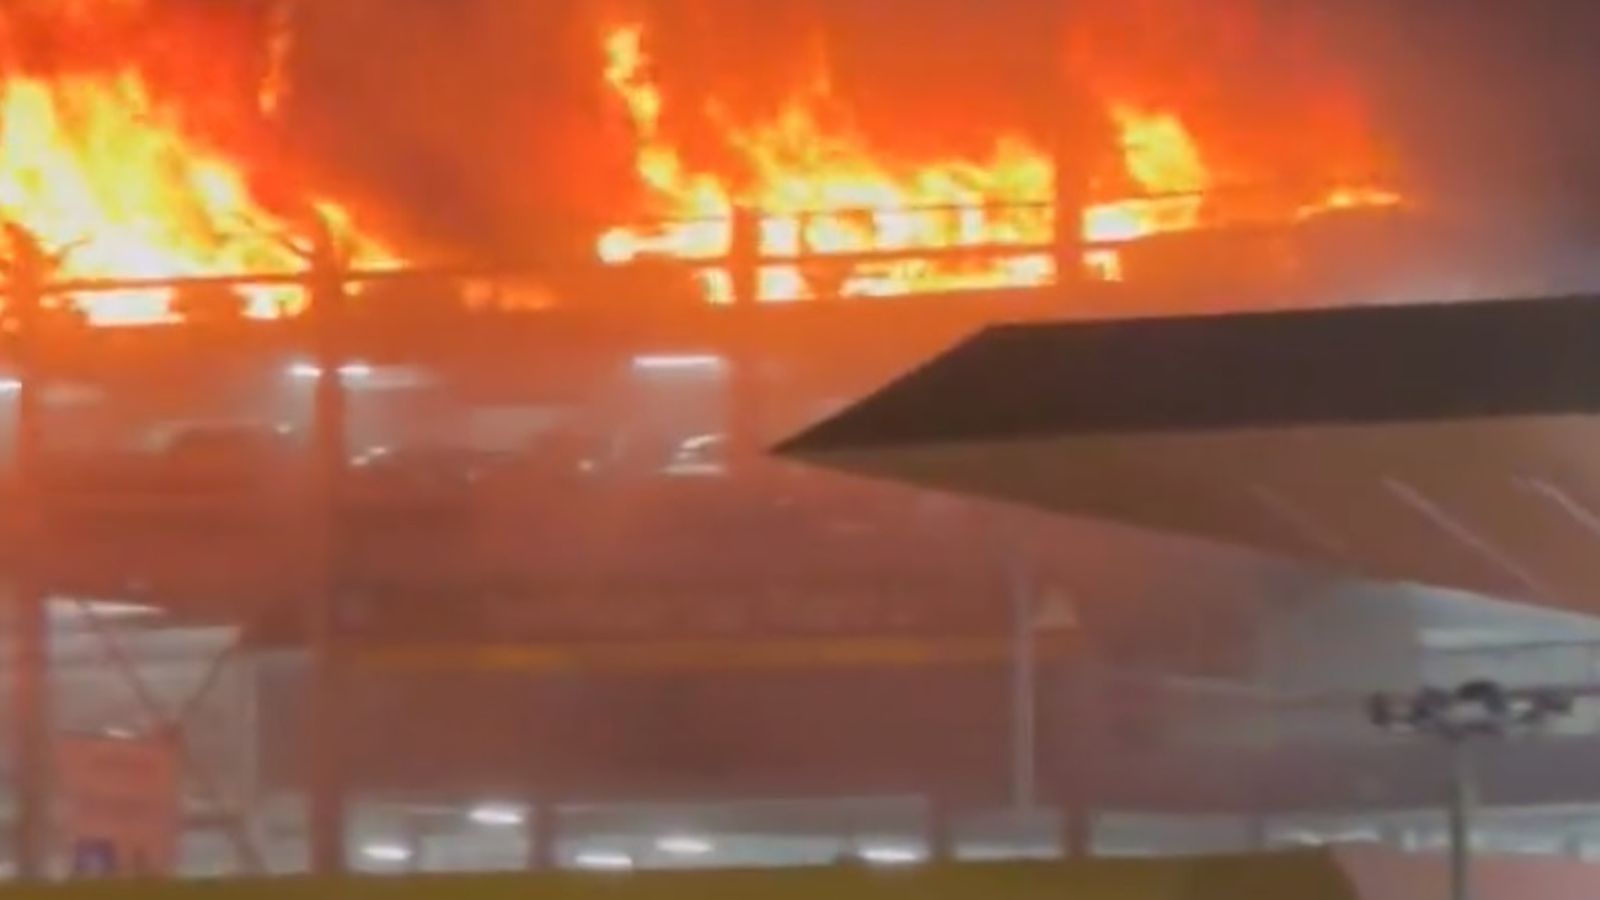 Luton Airport fire: Flights suspended as emergency crews respond to huge blaze at car park | Breaking News News